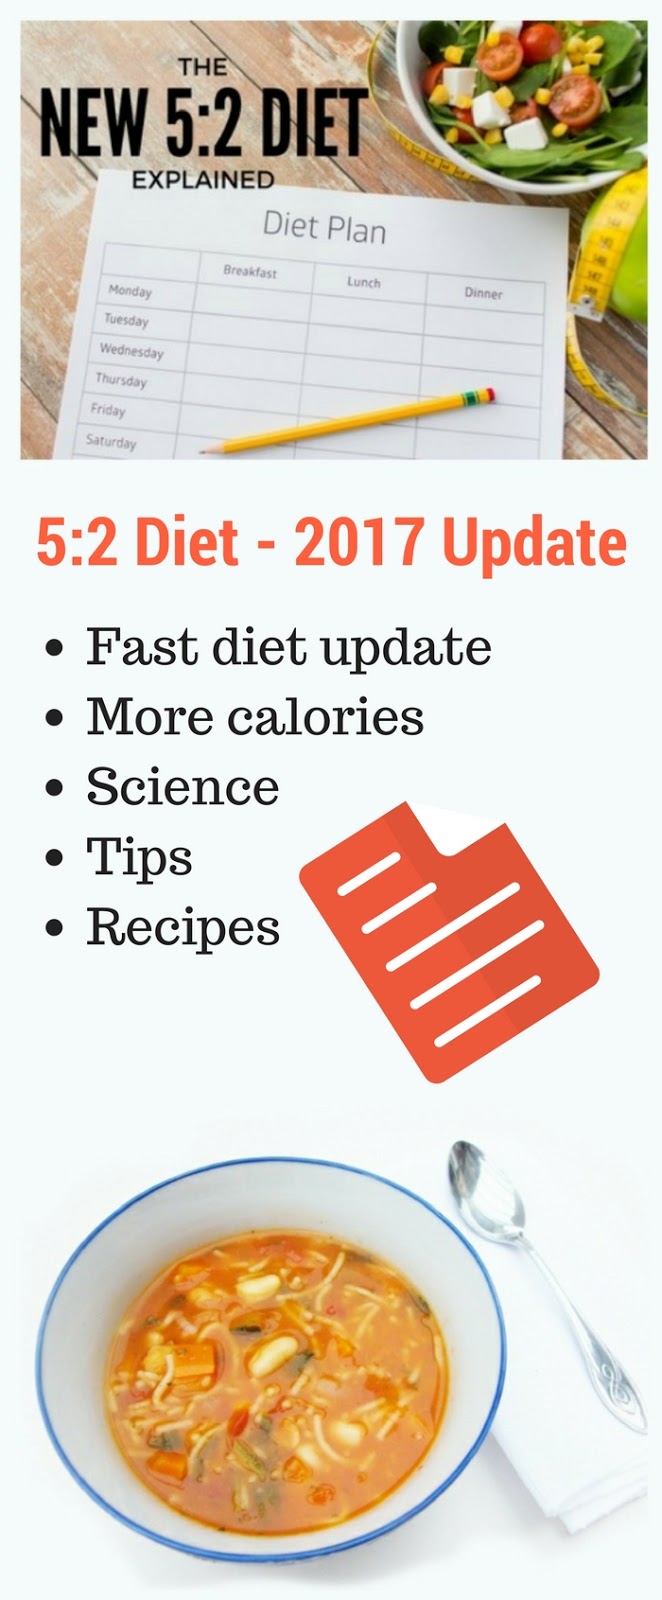 The new 5:2 Diet. Updated for 2017 with more calories, science, tips and recipes. www.tinnedtomatoes.com #vegetarian #vegan